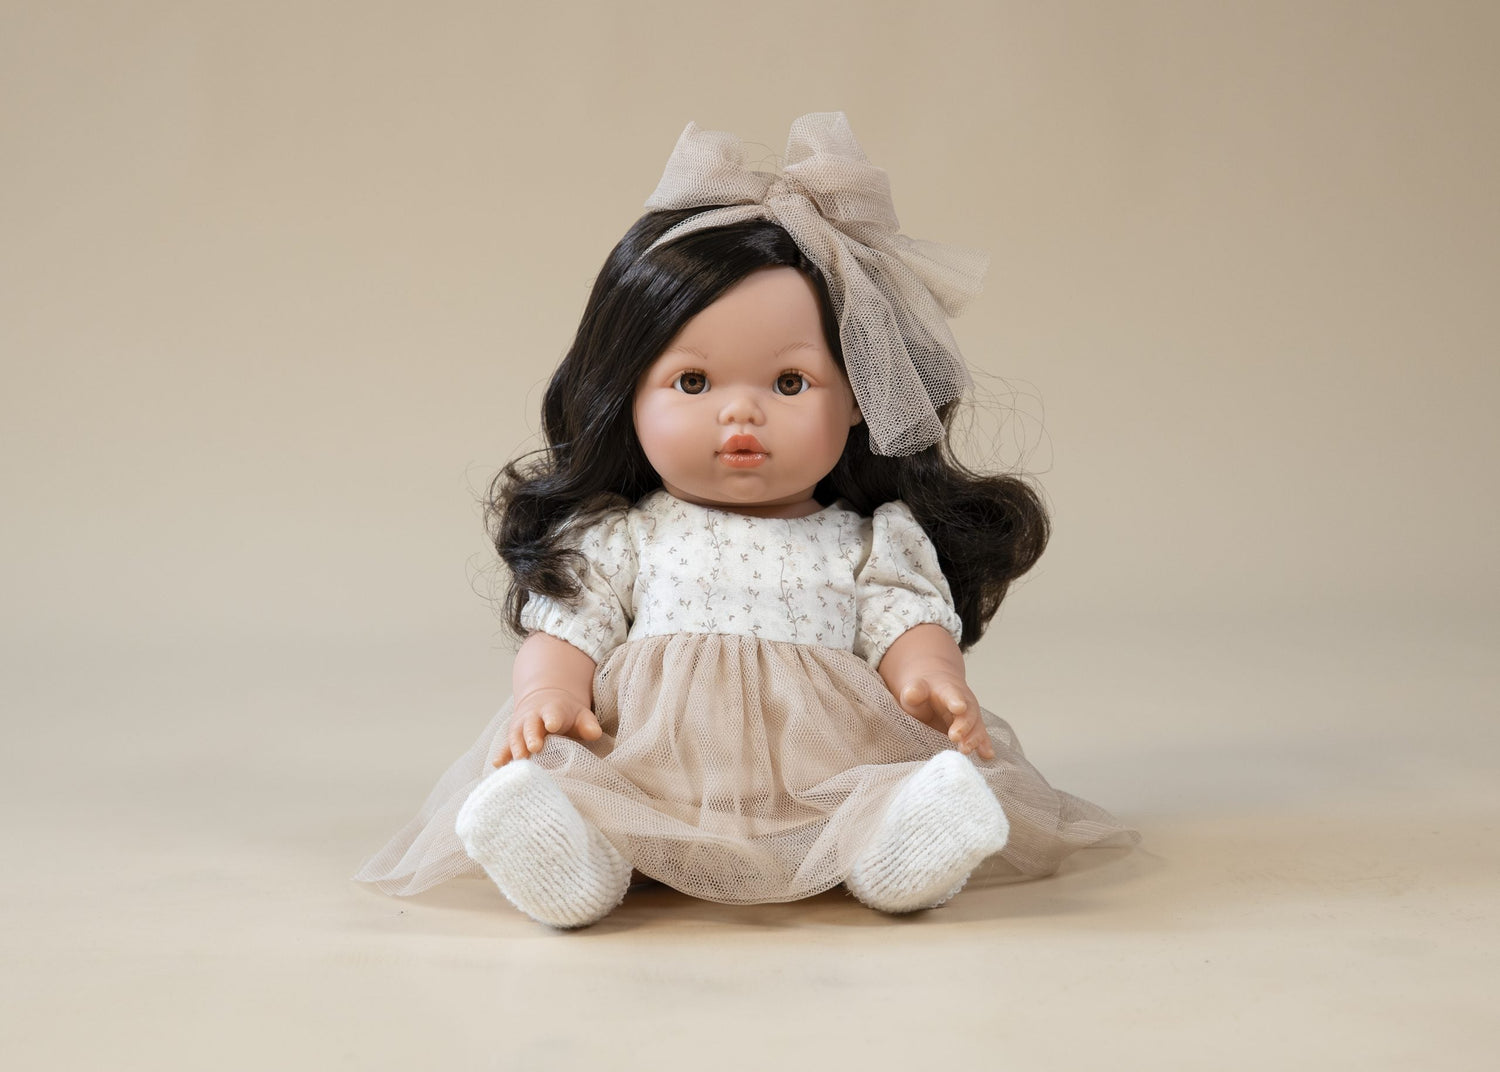 LLORENS DOLLS | MINI COLETTOS DOLL - ALASKA *PRE-ORDER* by LLORENS DOLLS - The Playful Collective